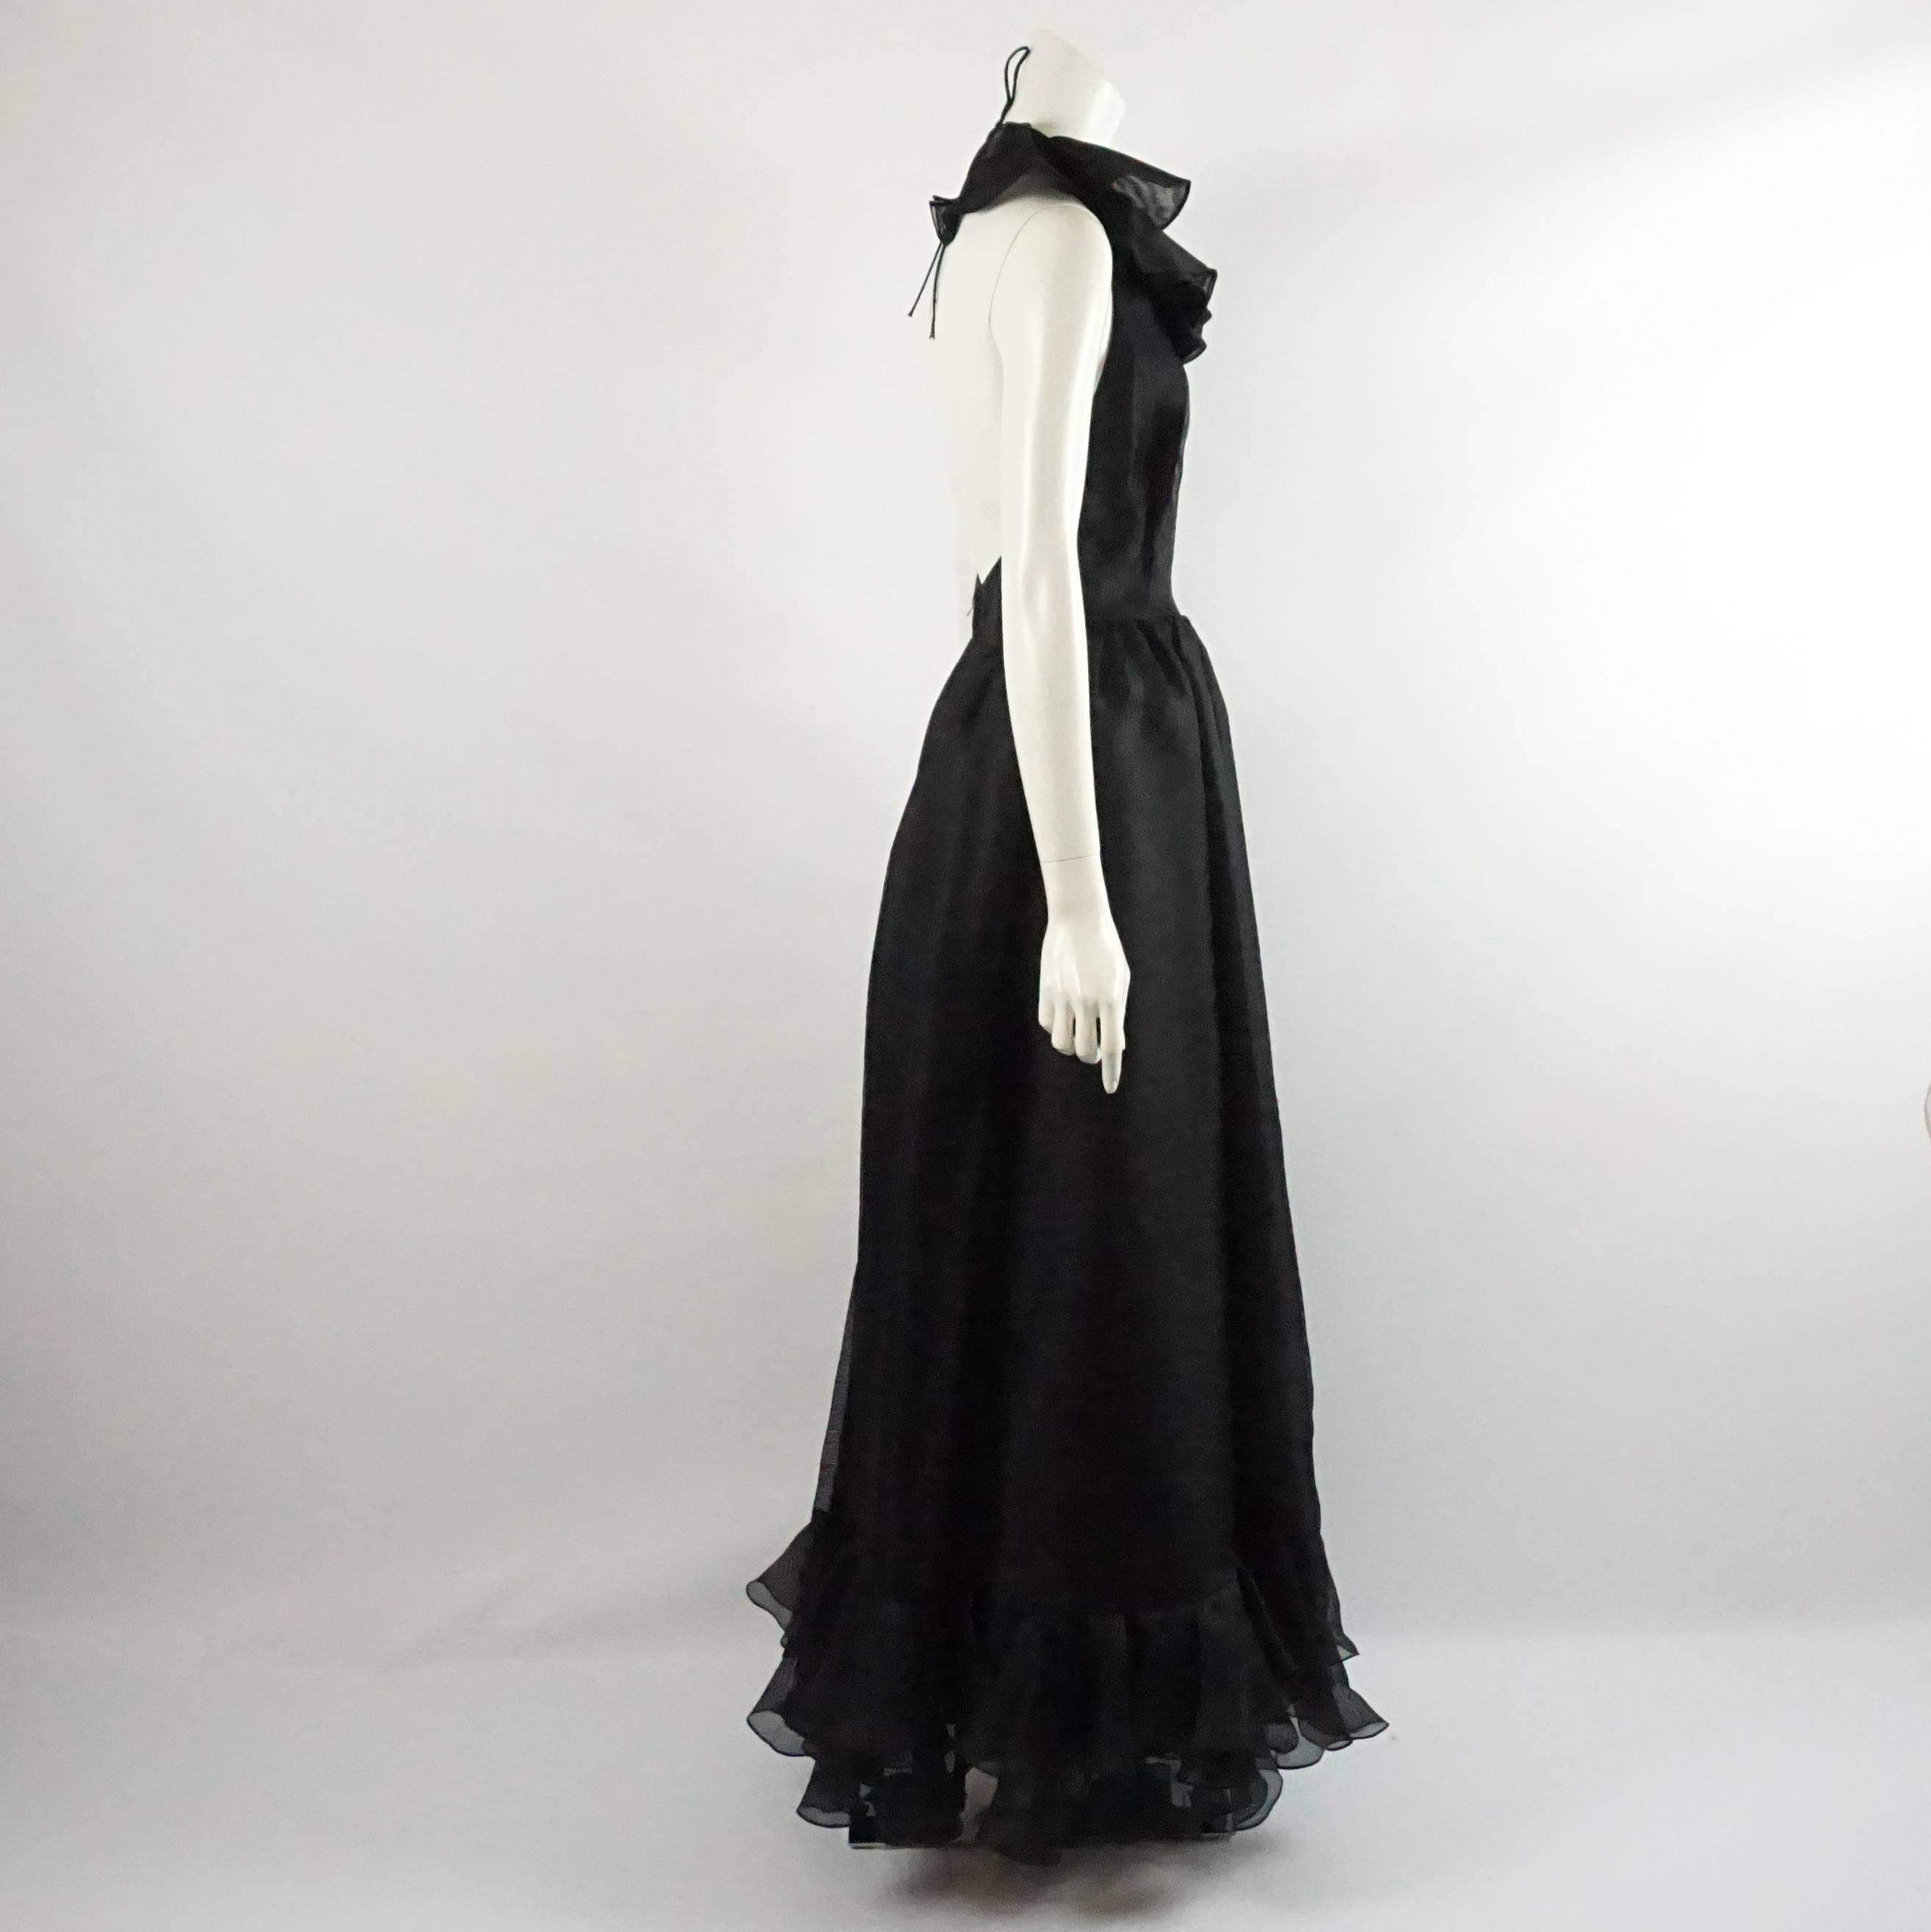 Oscar de la Renta Black Linen Halter Gown with Ruffles - 10 - 1990's . This gown is truly spectacular and can be worn black tie or cocktail because of its casual fabric. It features a fitted bodice with a delicate skirt flowing down to two bottom